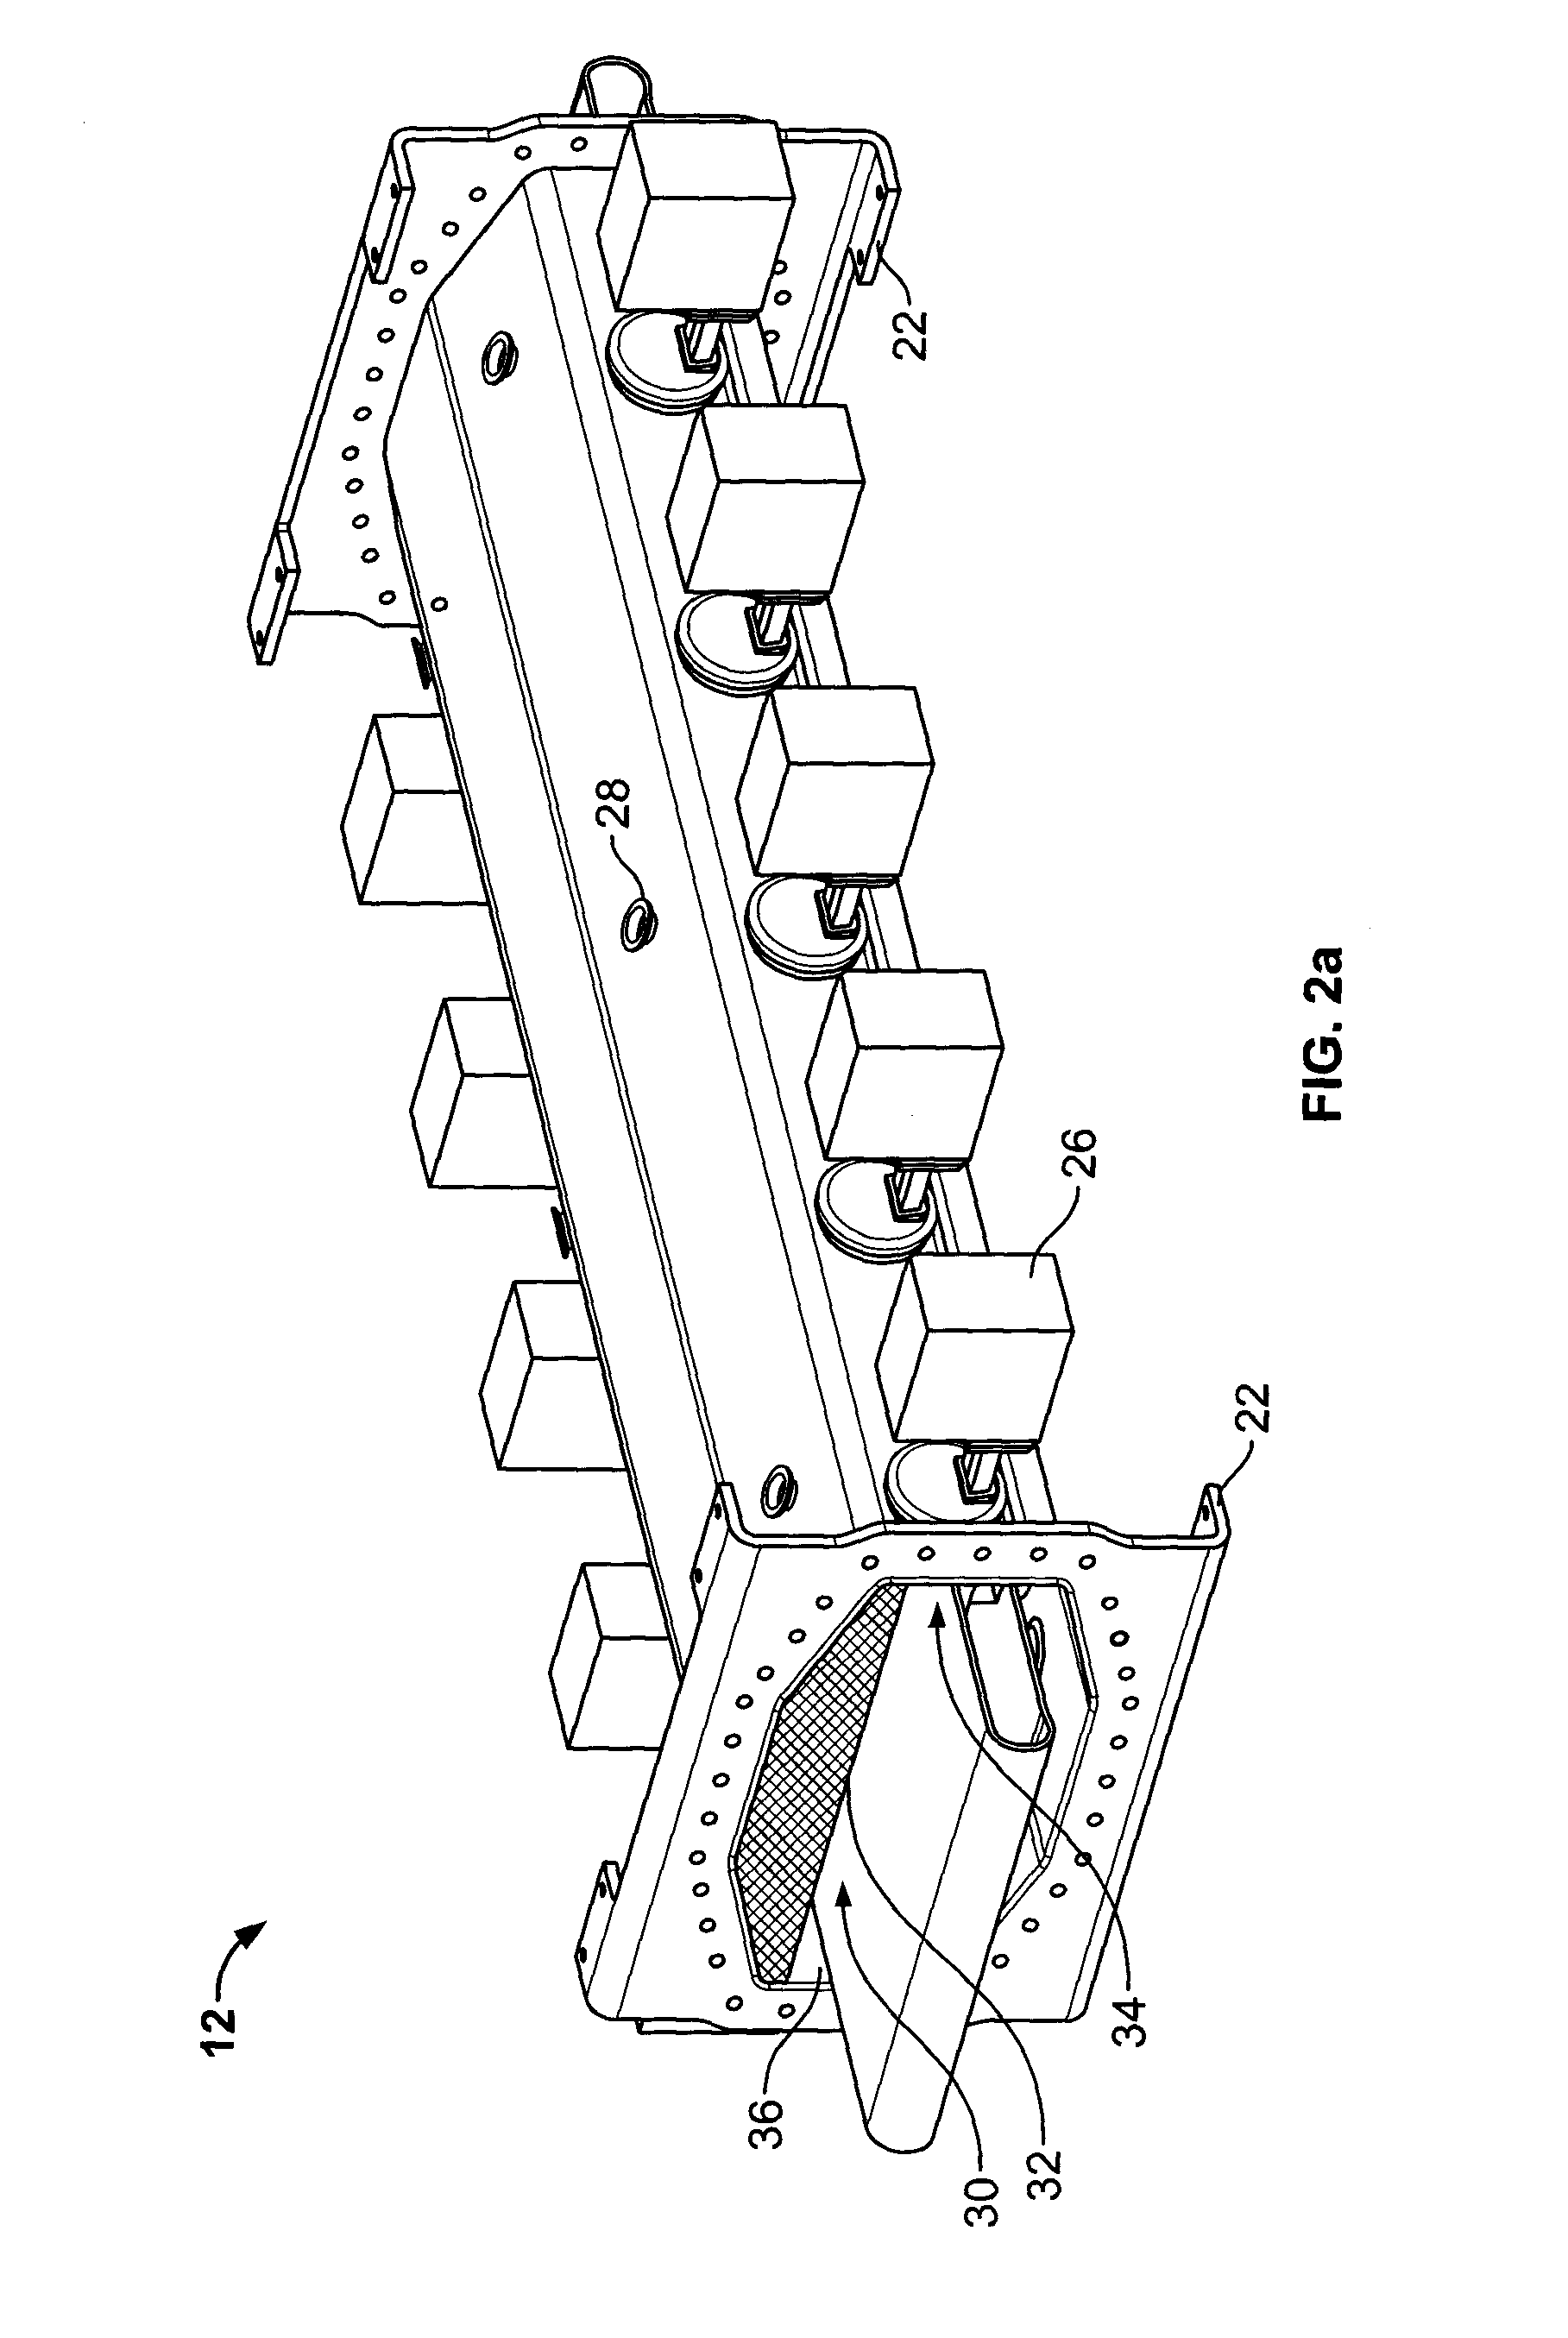 Apparatus and method for dehydration using microwave radiation